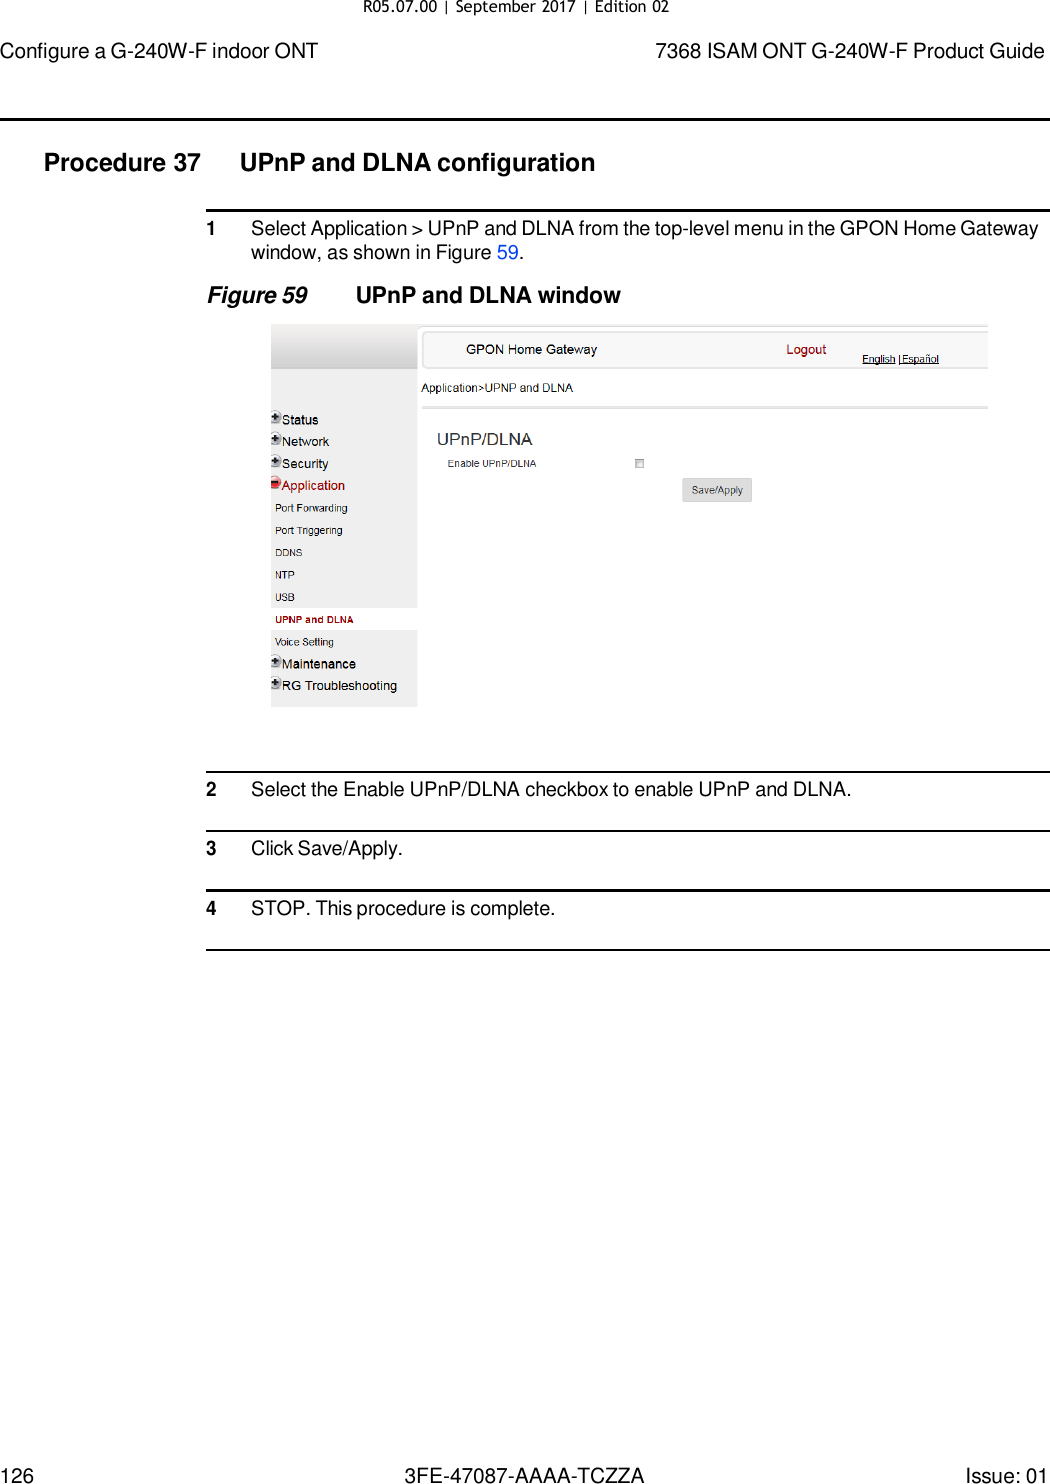 Page 120 of Nokia Bell G240WFV2 7368 ISAM GPON ONU User Manual 7368 ISAM ONT G 240W F Product Guide